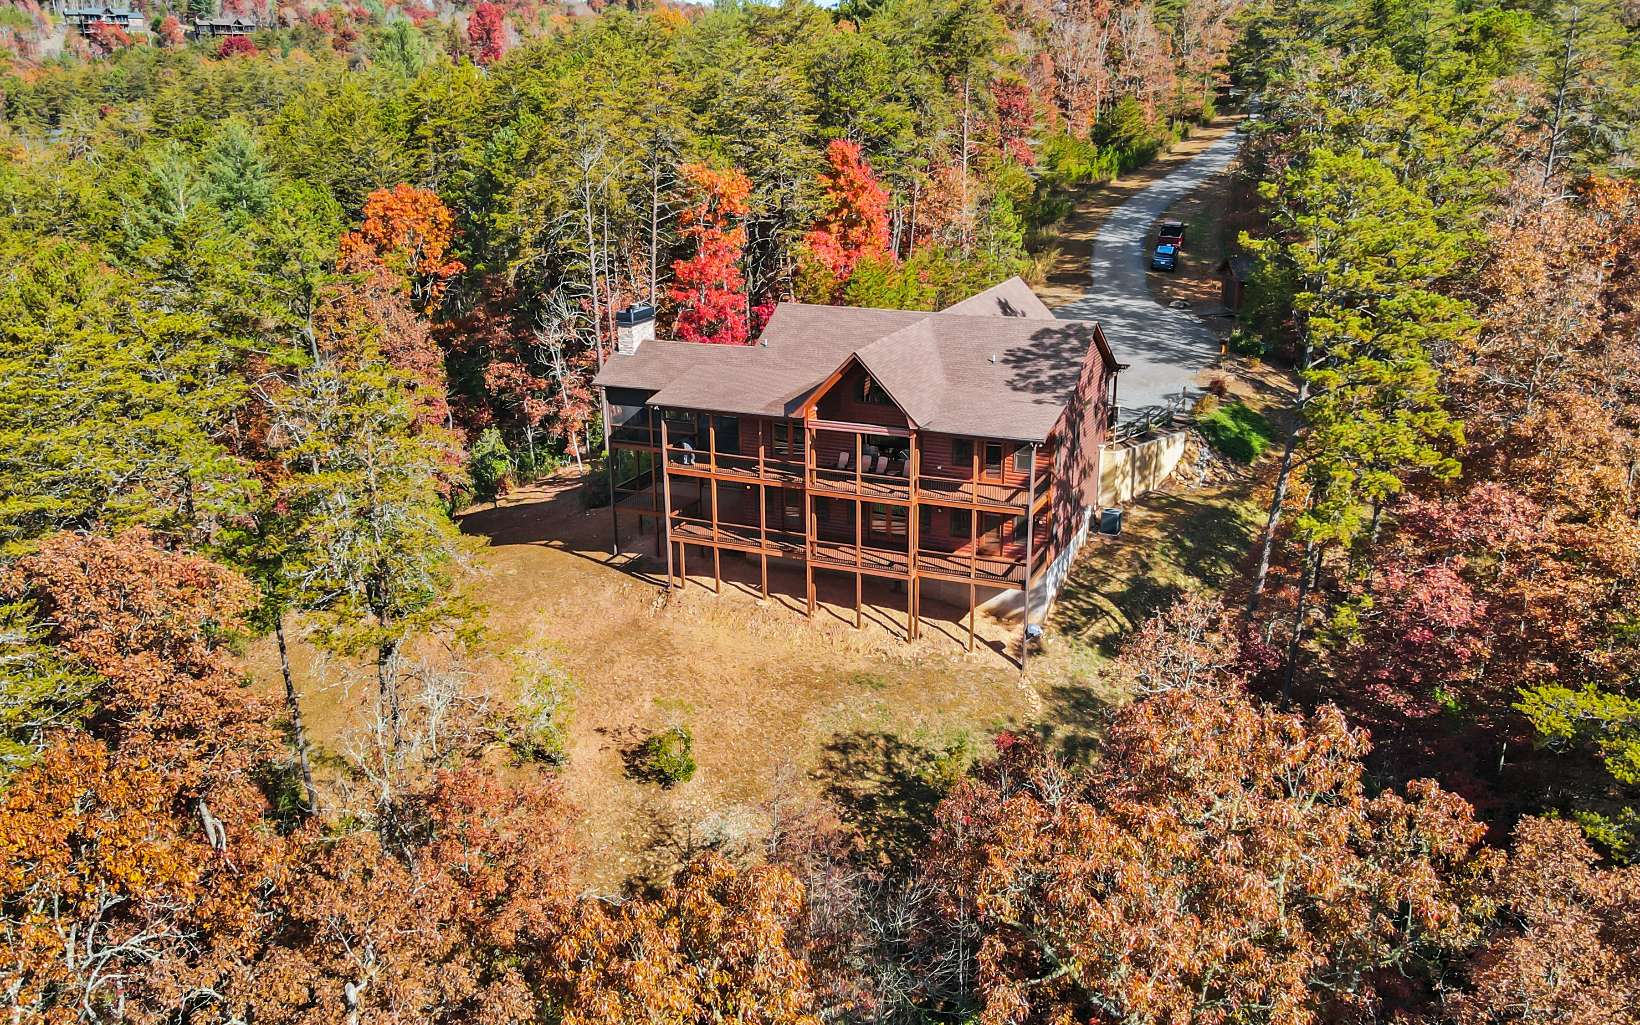 This Gorgeous 4 bedroom and 4 1/2 bath pristine mountain cabin sits on 5 beautiful acres in the Gated Community of The Highlands. Turn-key & gorgeously furnished home offers over 3200 sf under air and so much more. Enjoy morning views with coffee on your wrap around decks. Great space for entertaining on the outdoor decks with wood burning fireplace or outdoor living area. Open floor plan with spacious kitchen, Stainless appliances & granite throughout. Custom cabinetry & custom tile finished with 3 stacked stone fireplaces. Relax & take in all of the year around mountain views in great room with wall of windows and floor to ceiling stone fireplace. Master Suites on all levels as well as laundry rooms and wet bar. Private setting at end of cul-de-sac with 2-car portico and wonderful workshop with power. Too many features to mention! This home is turn-key & ready for your forever home or to be your investment property.